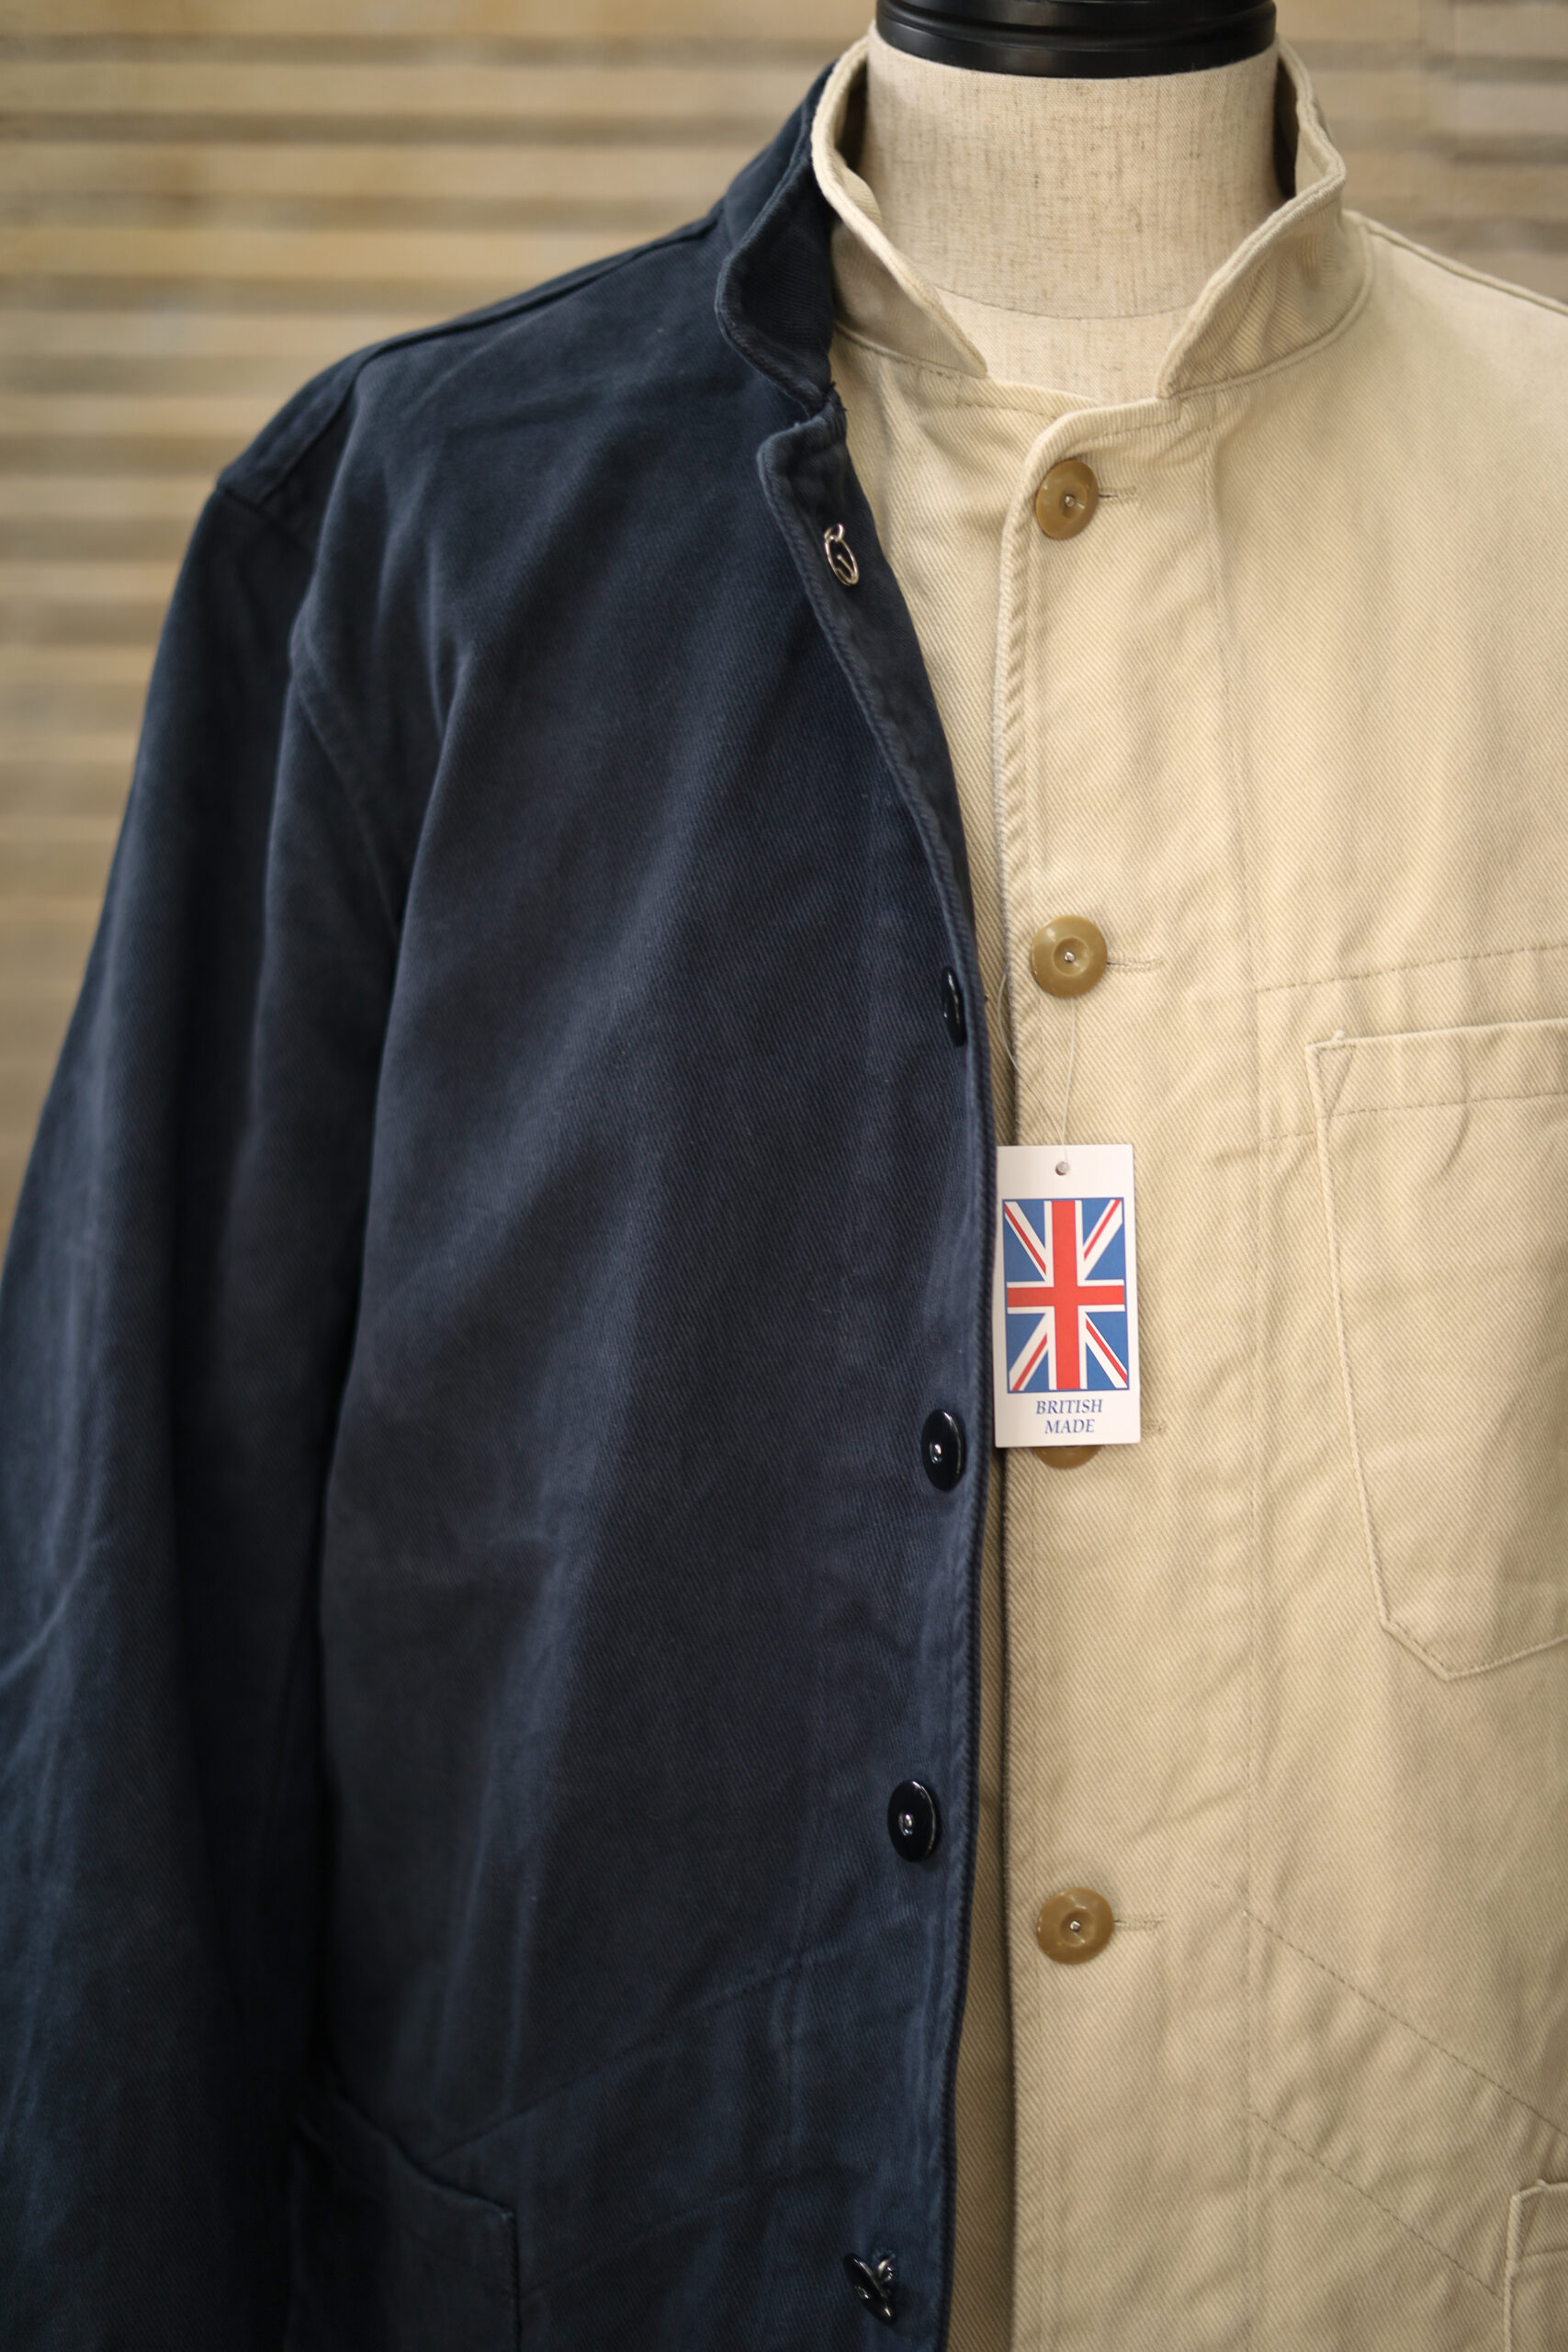 Arch Sapporo Made in England British Work Jacket | ARCH アーチ 